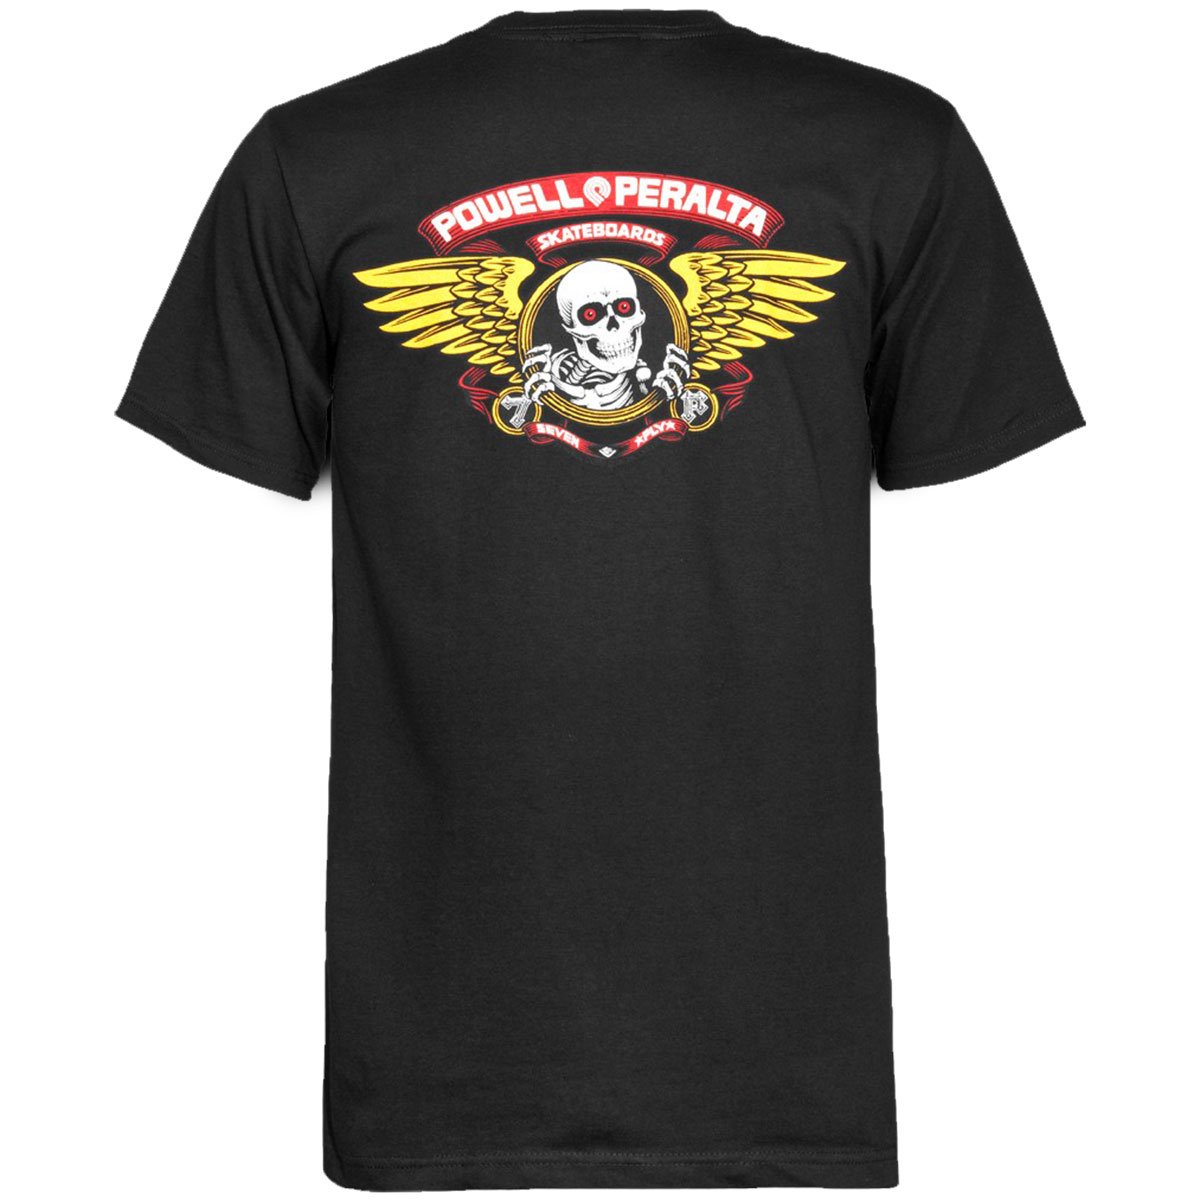 Powell-Peralta Winged Ripper T-Shirt-Black-MD image 1